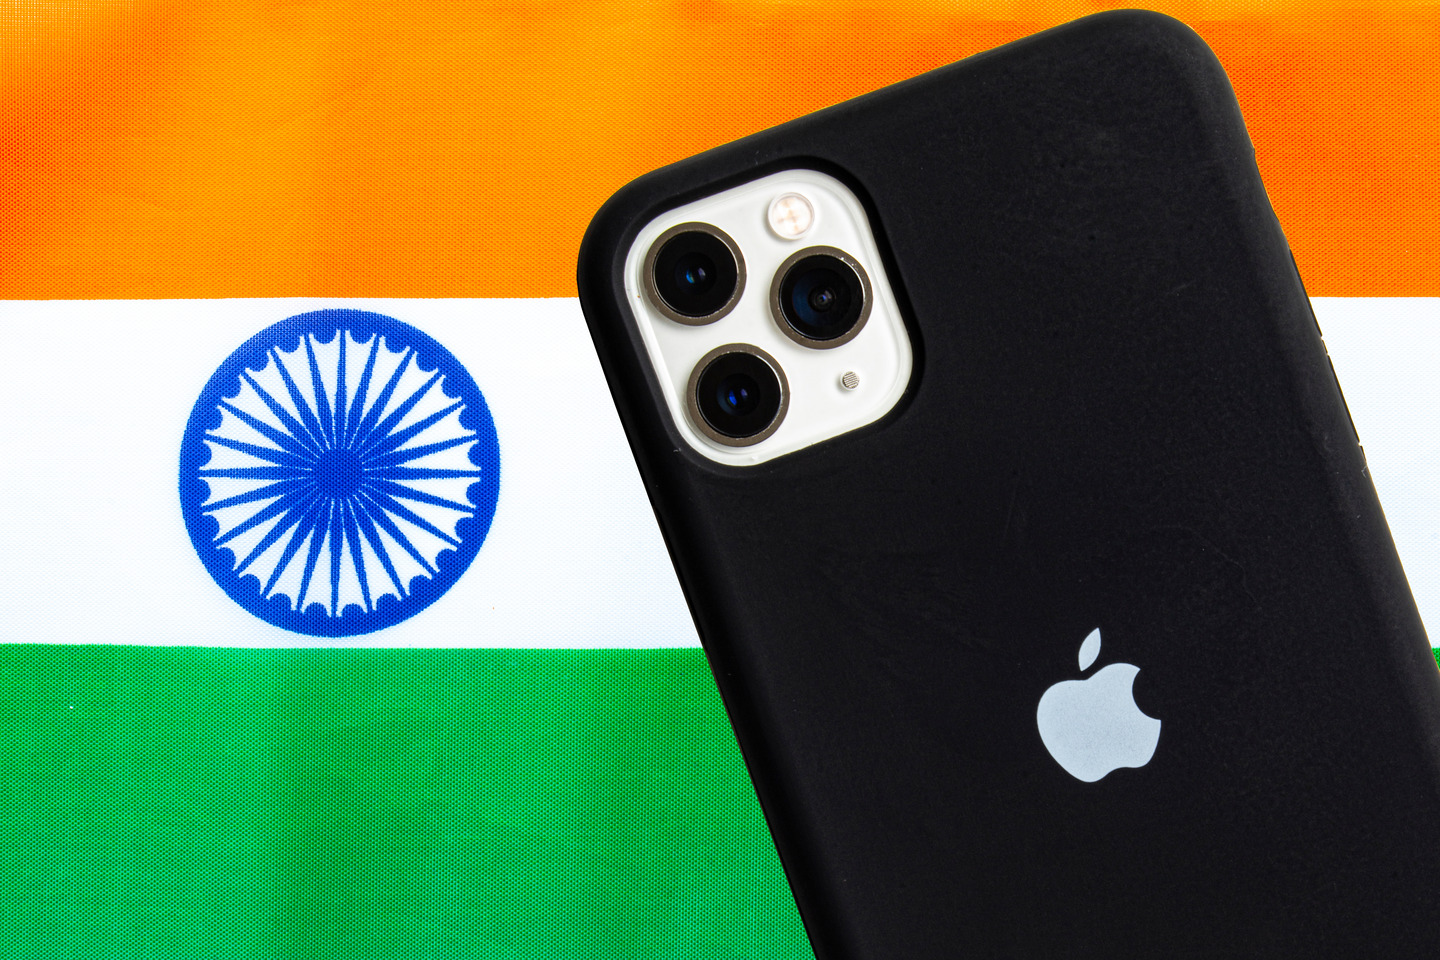 Foxconn and Apple both haave big plans in India.